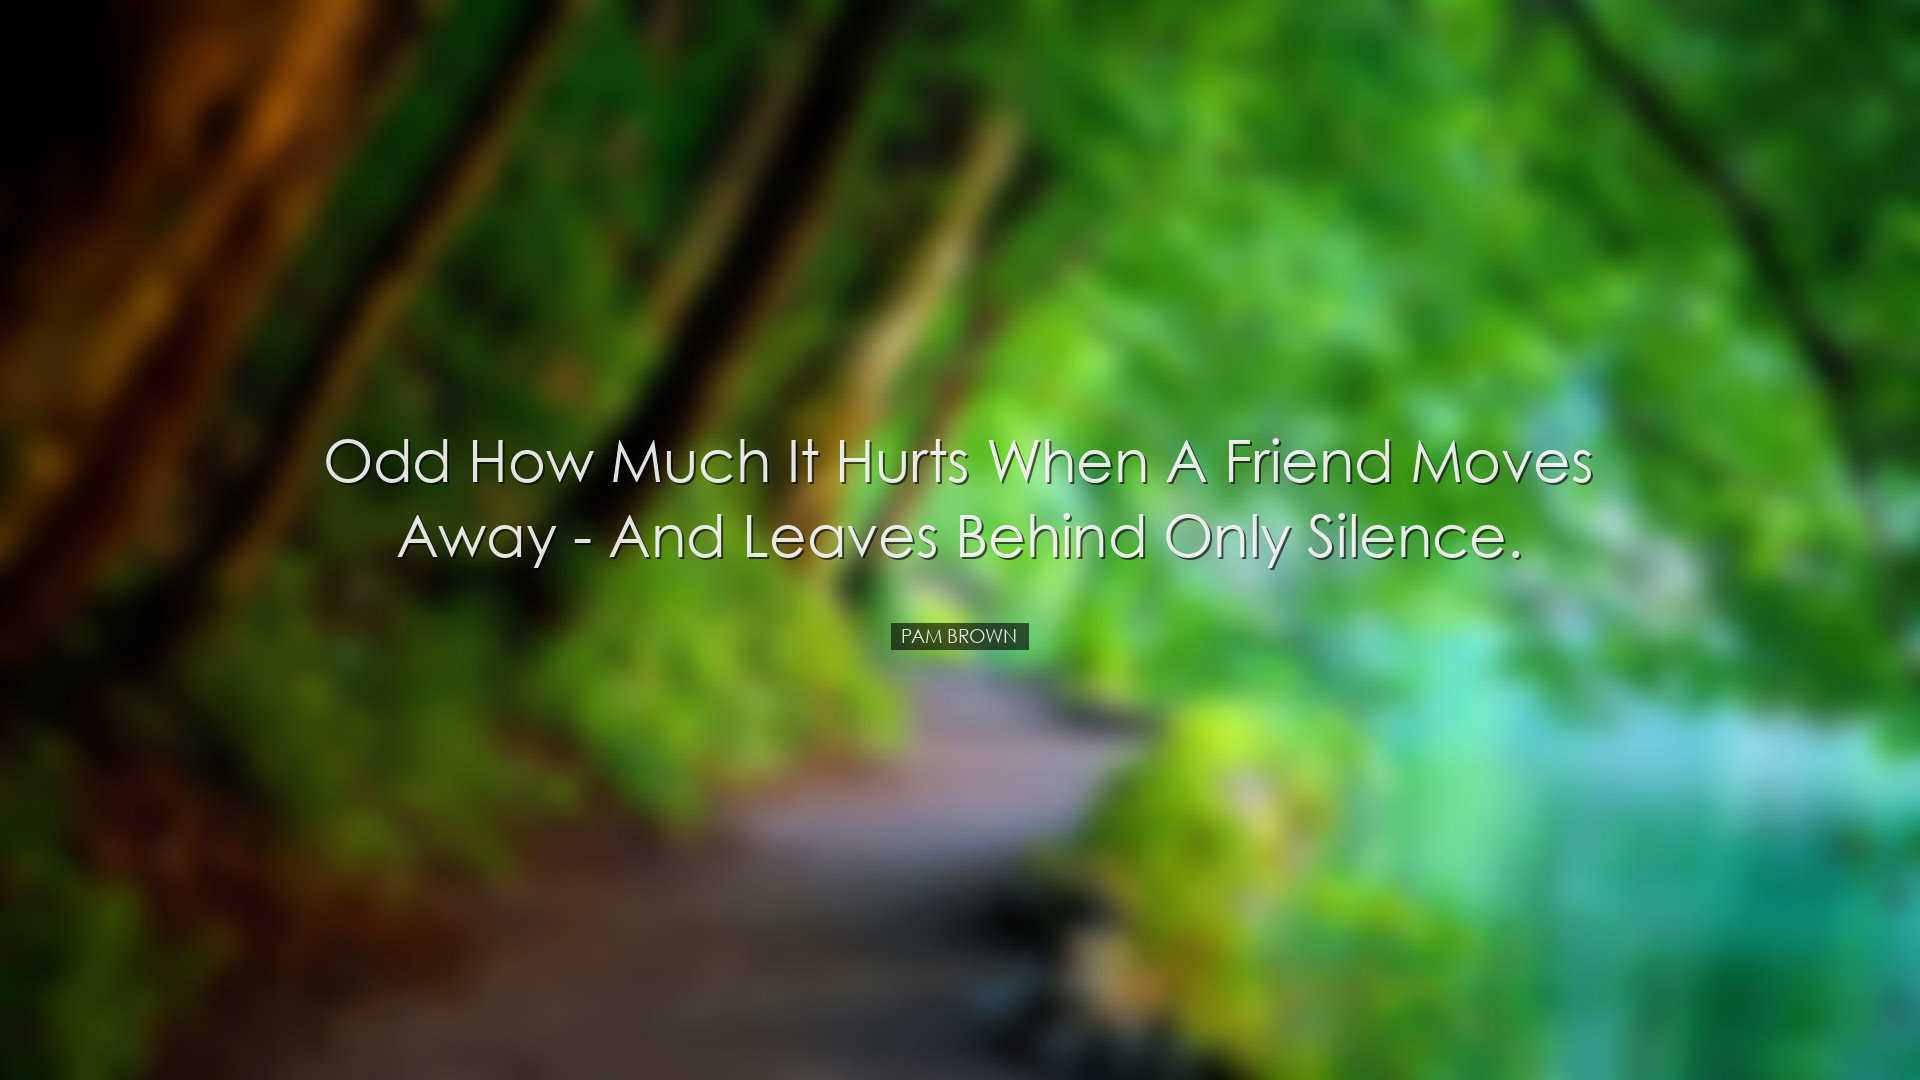 Odd how much it hurts when a friend moves away - and leaves behind